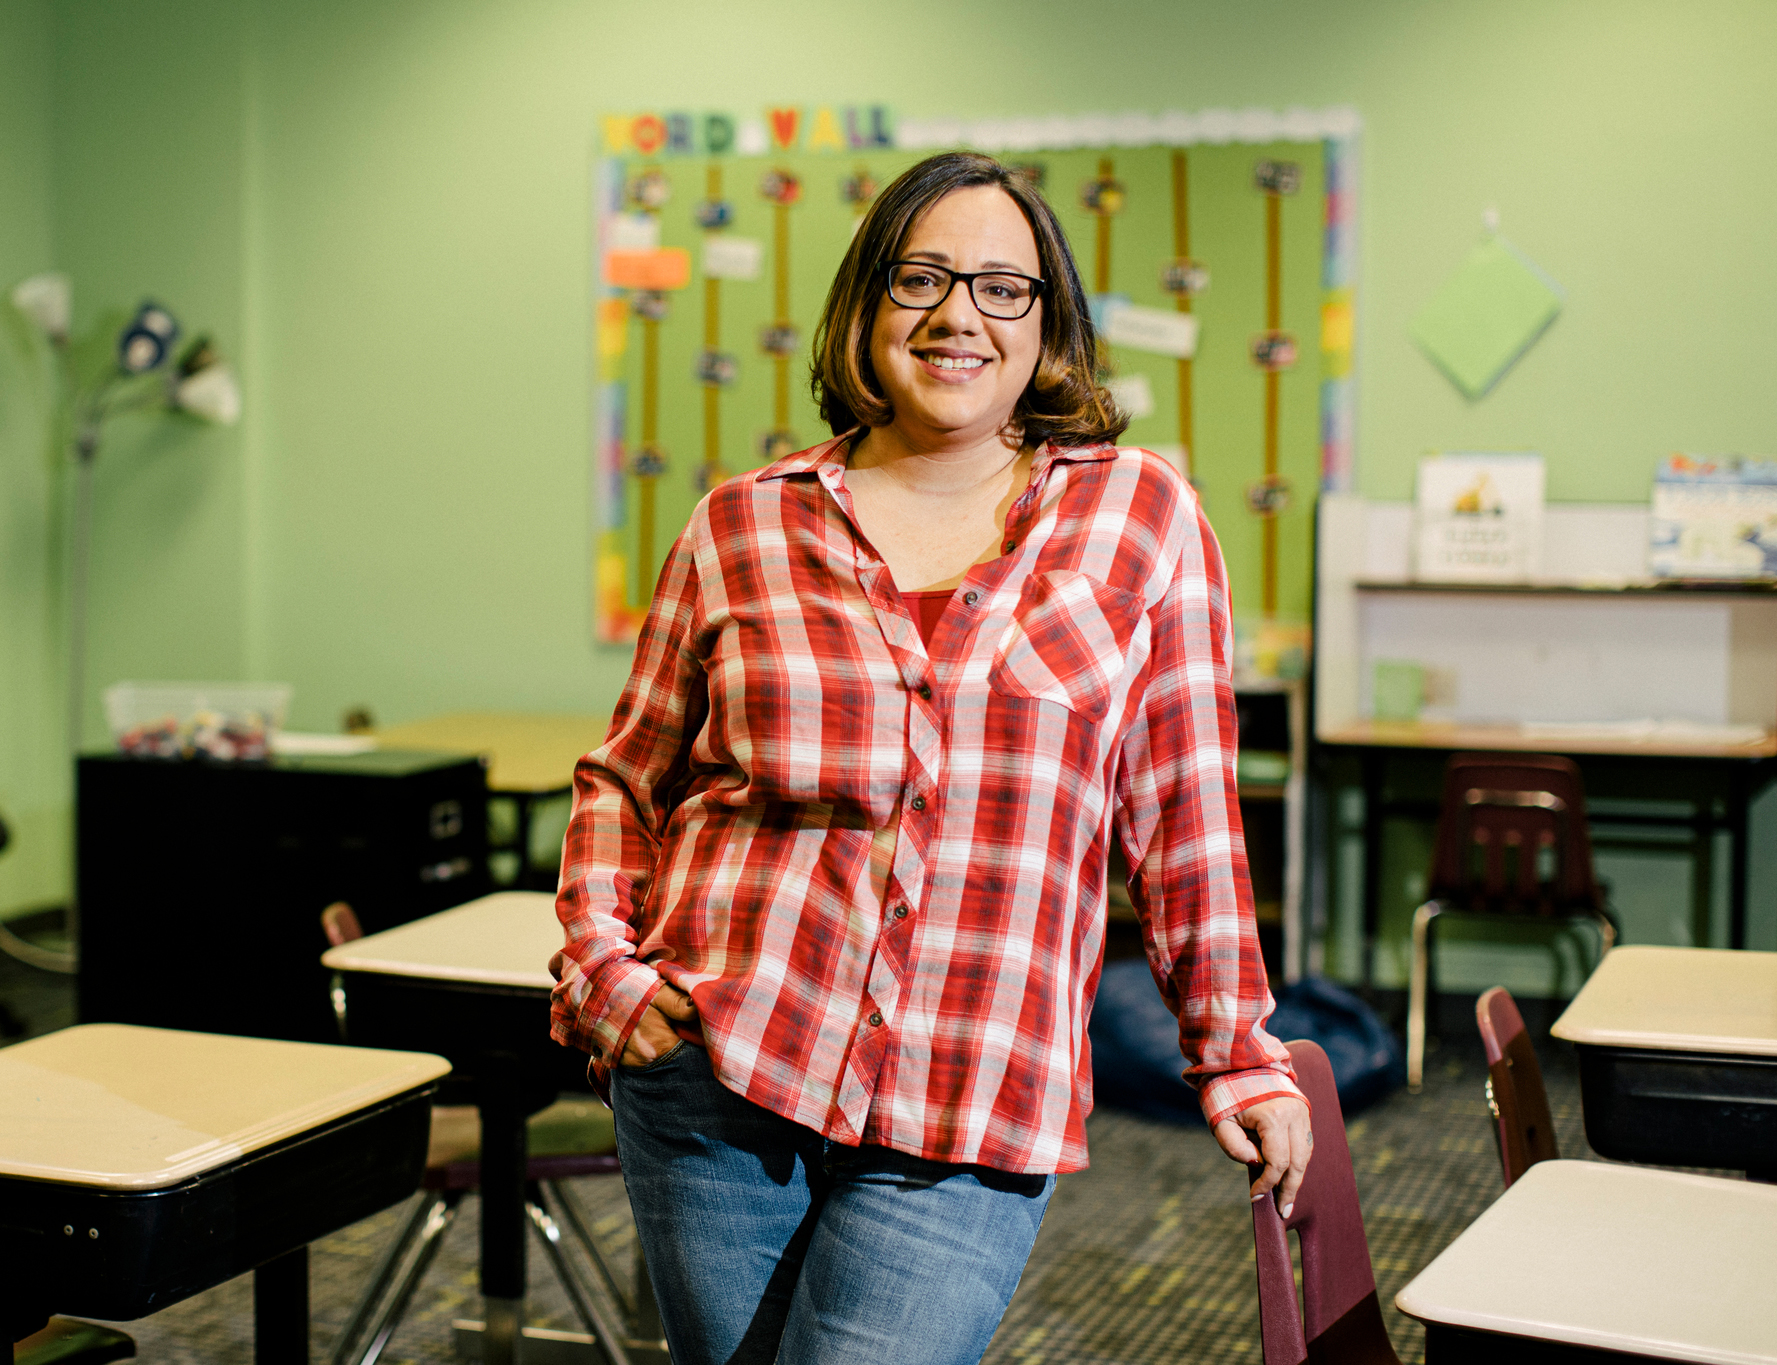 Laura Medina Coste poses for a photo in her classroom in Paul and Sheila Wellstone Elementary in St. Paul.